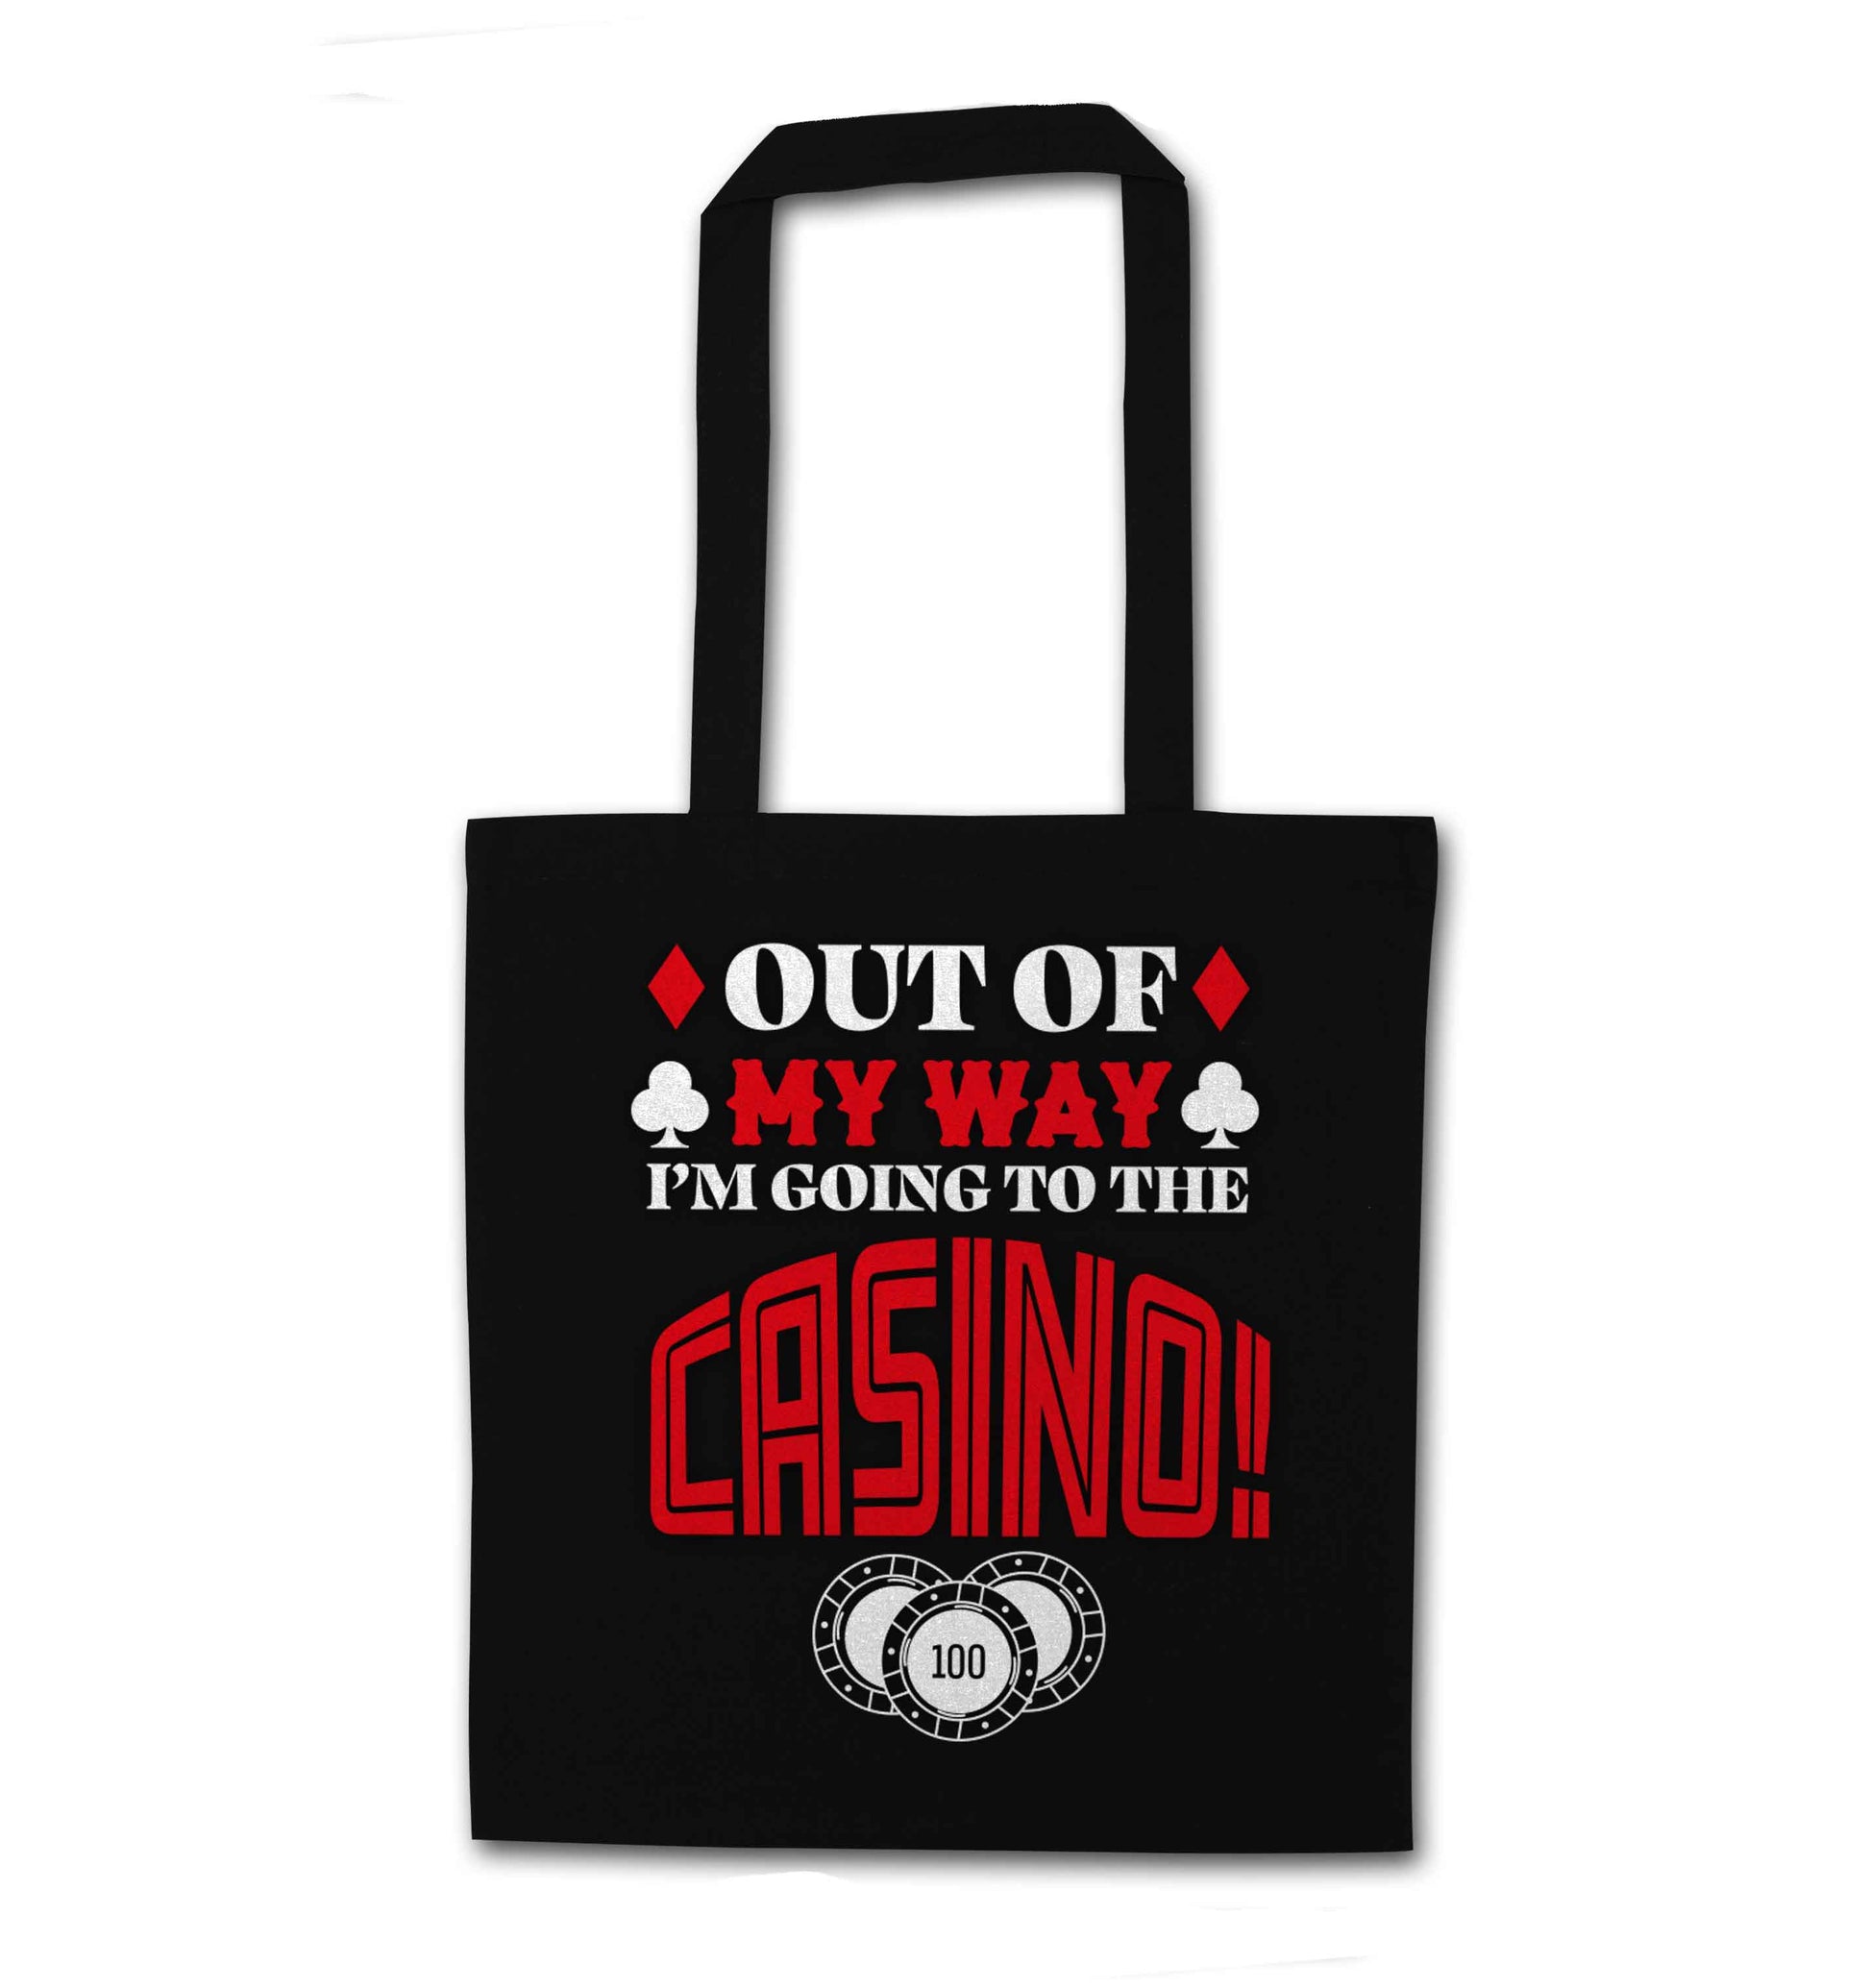 Out of my way I'm going to the casino black tote bag